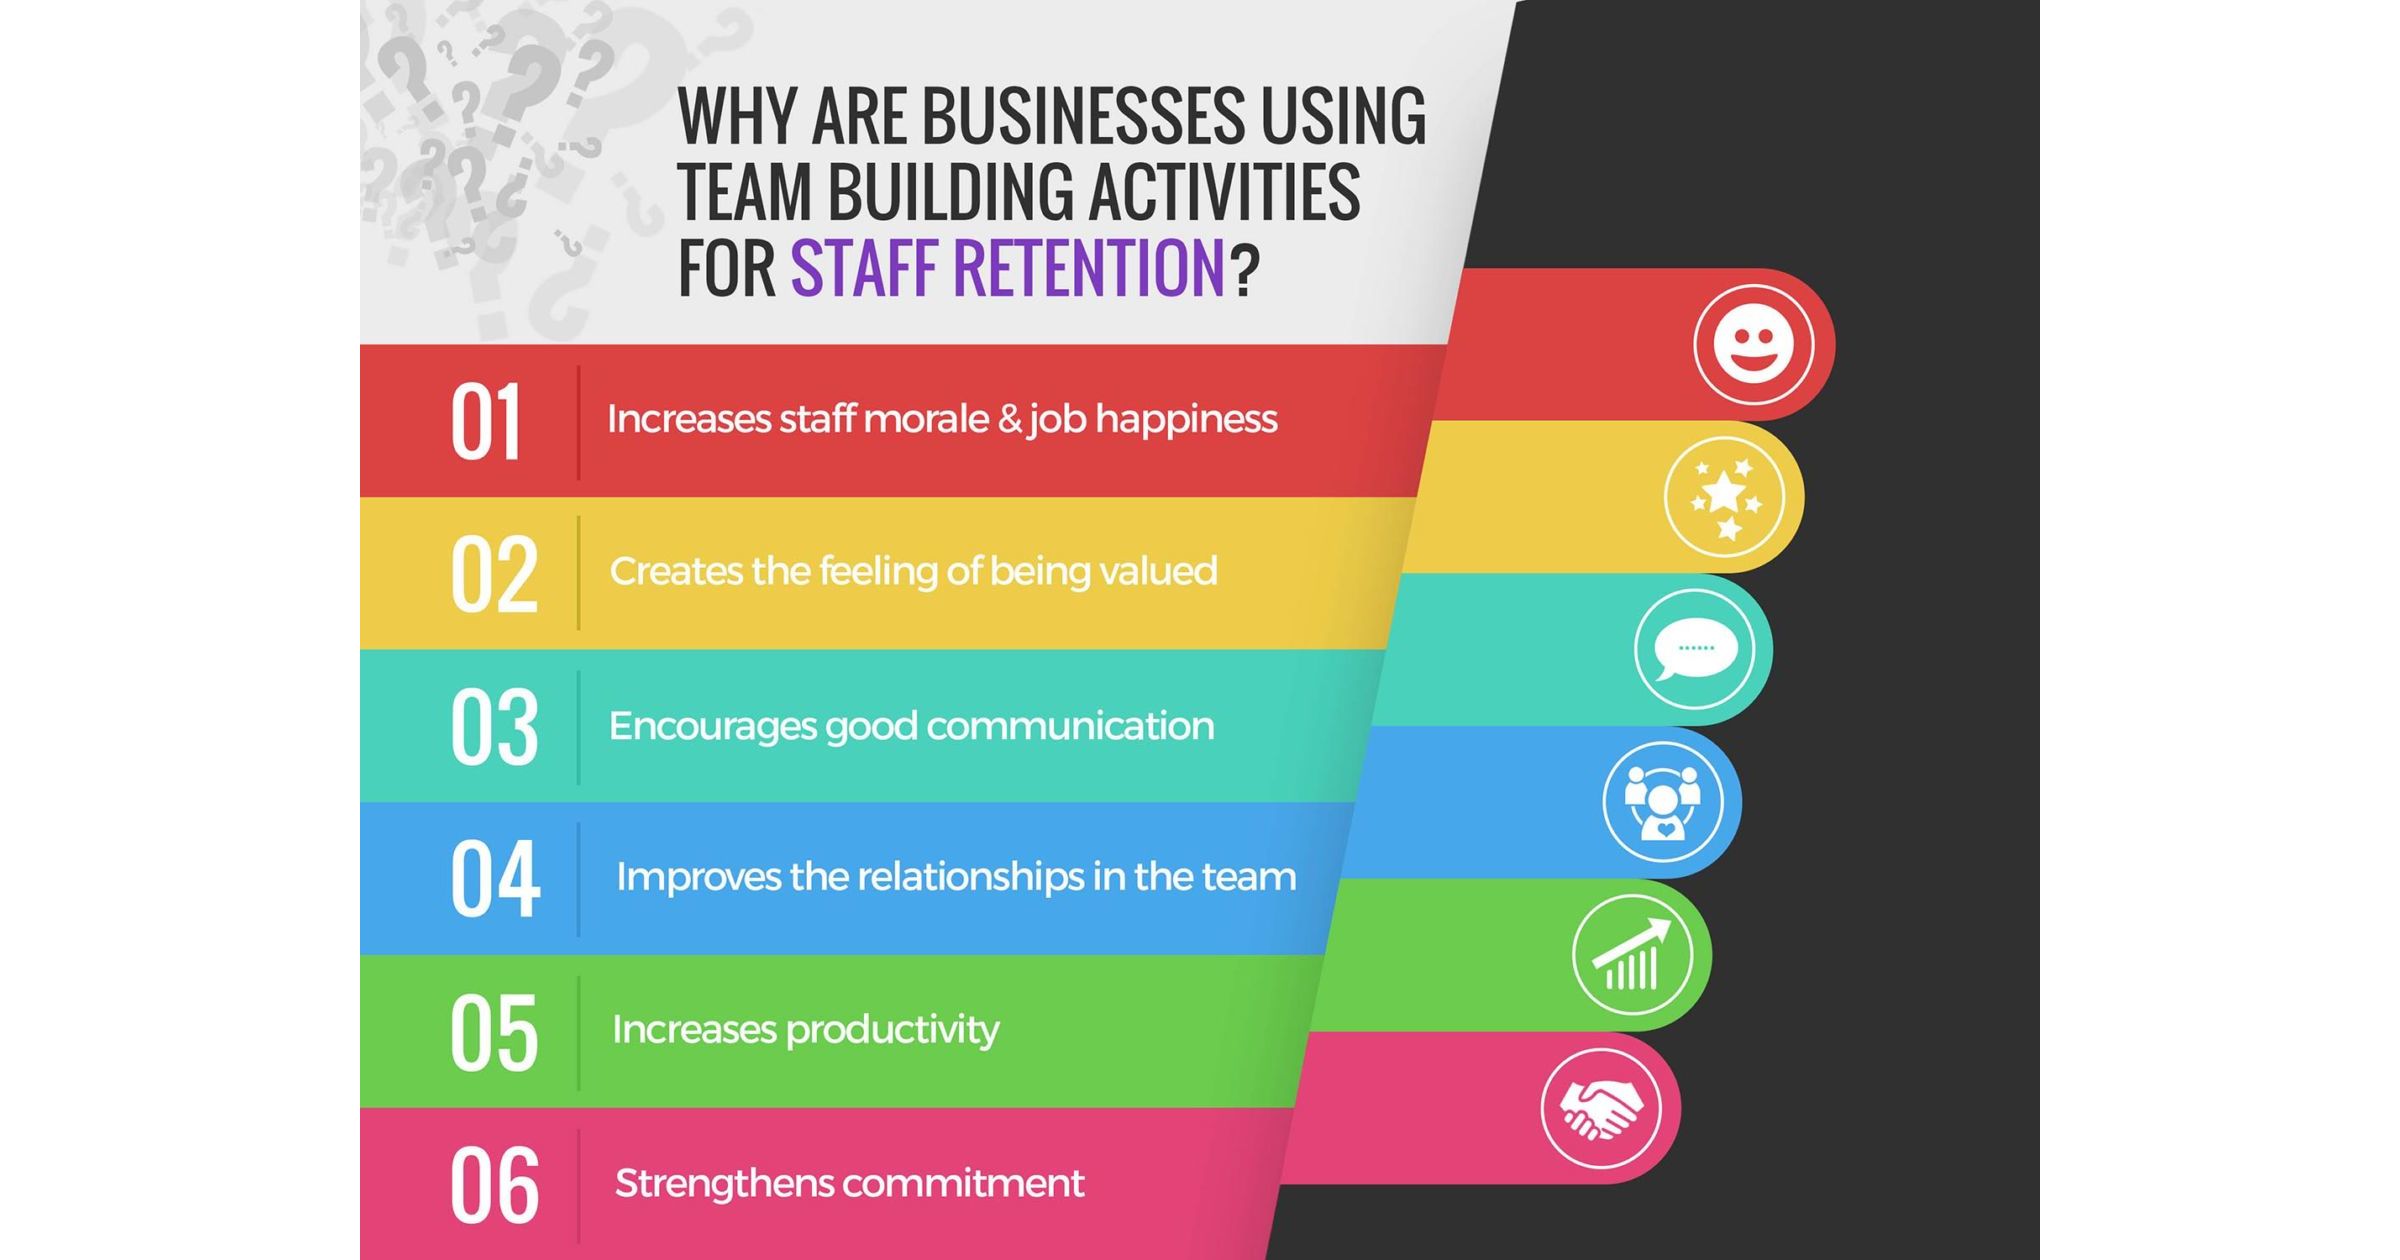 Staff Retention - Why Are Businesses Using Team Building Activities?